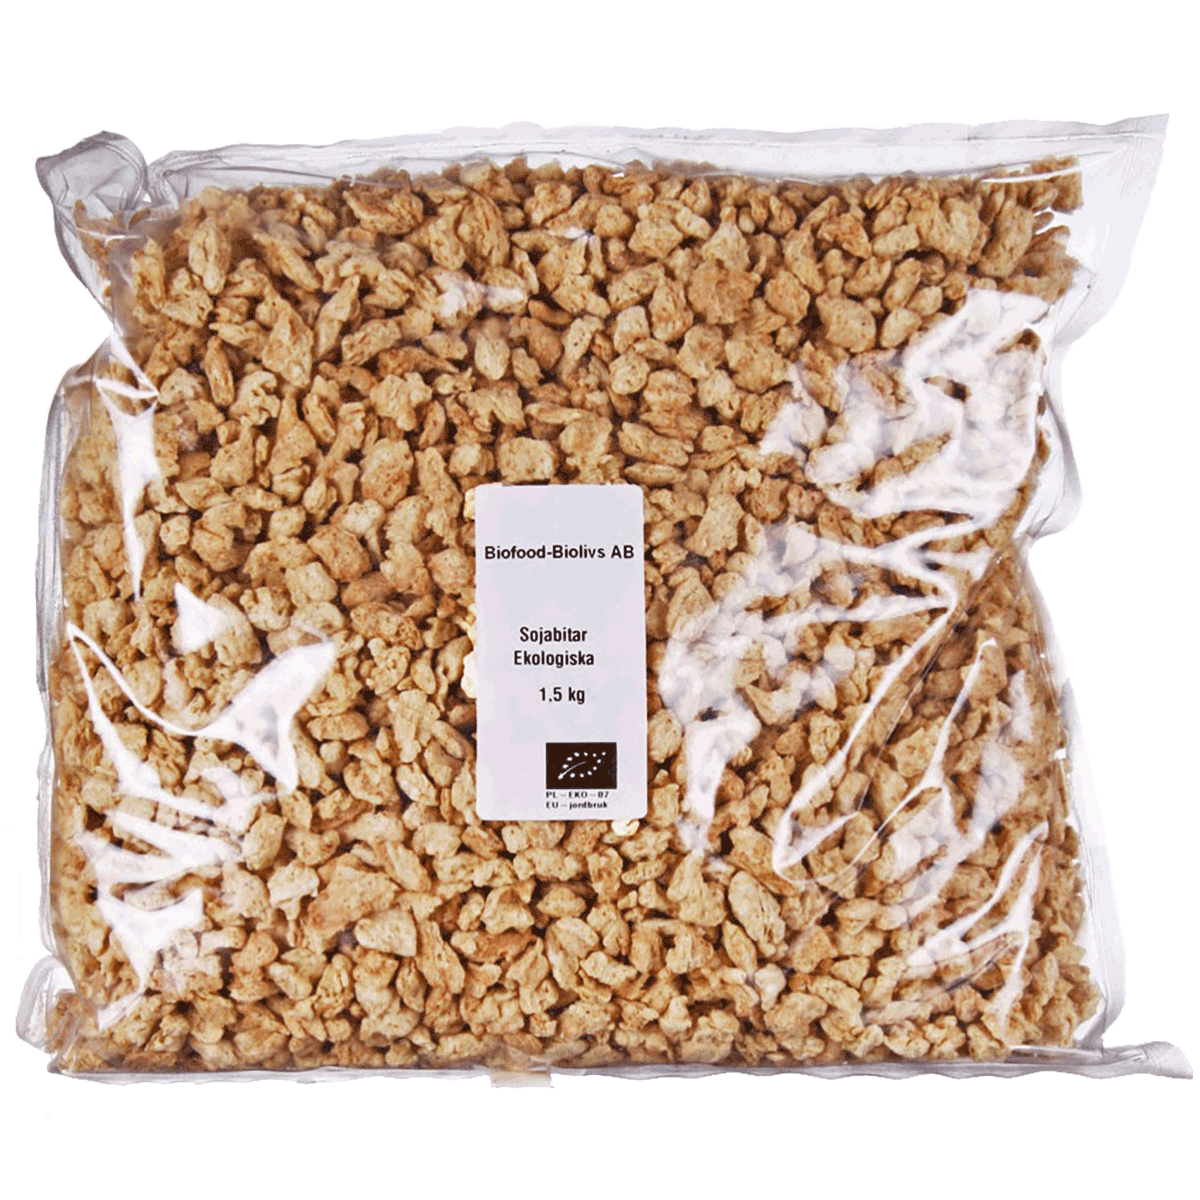 Soy chunks from Biofood